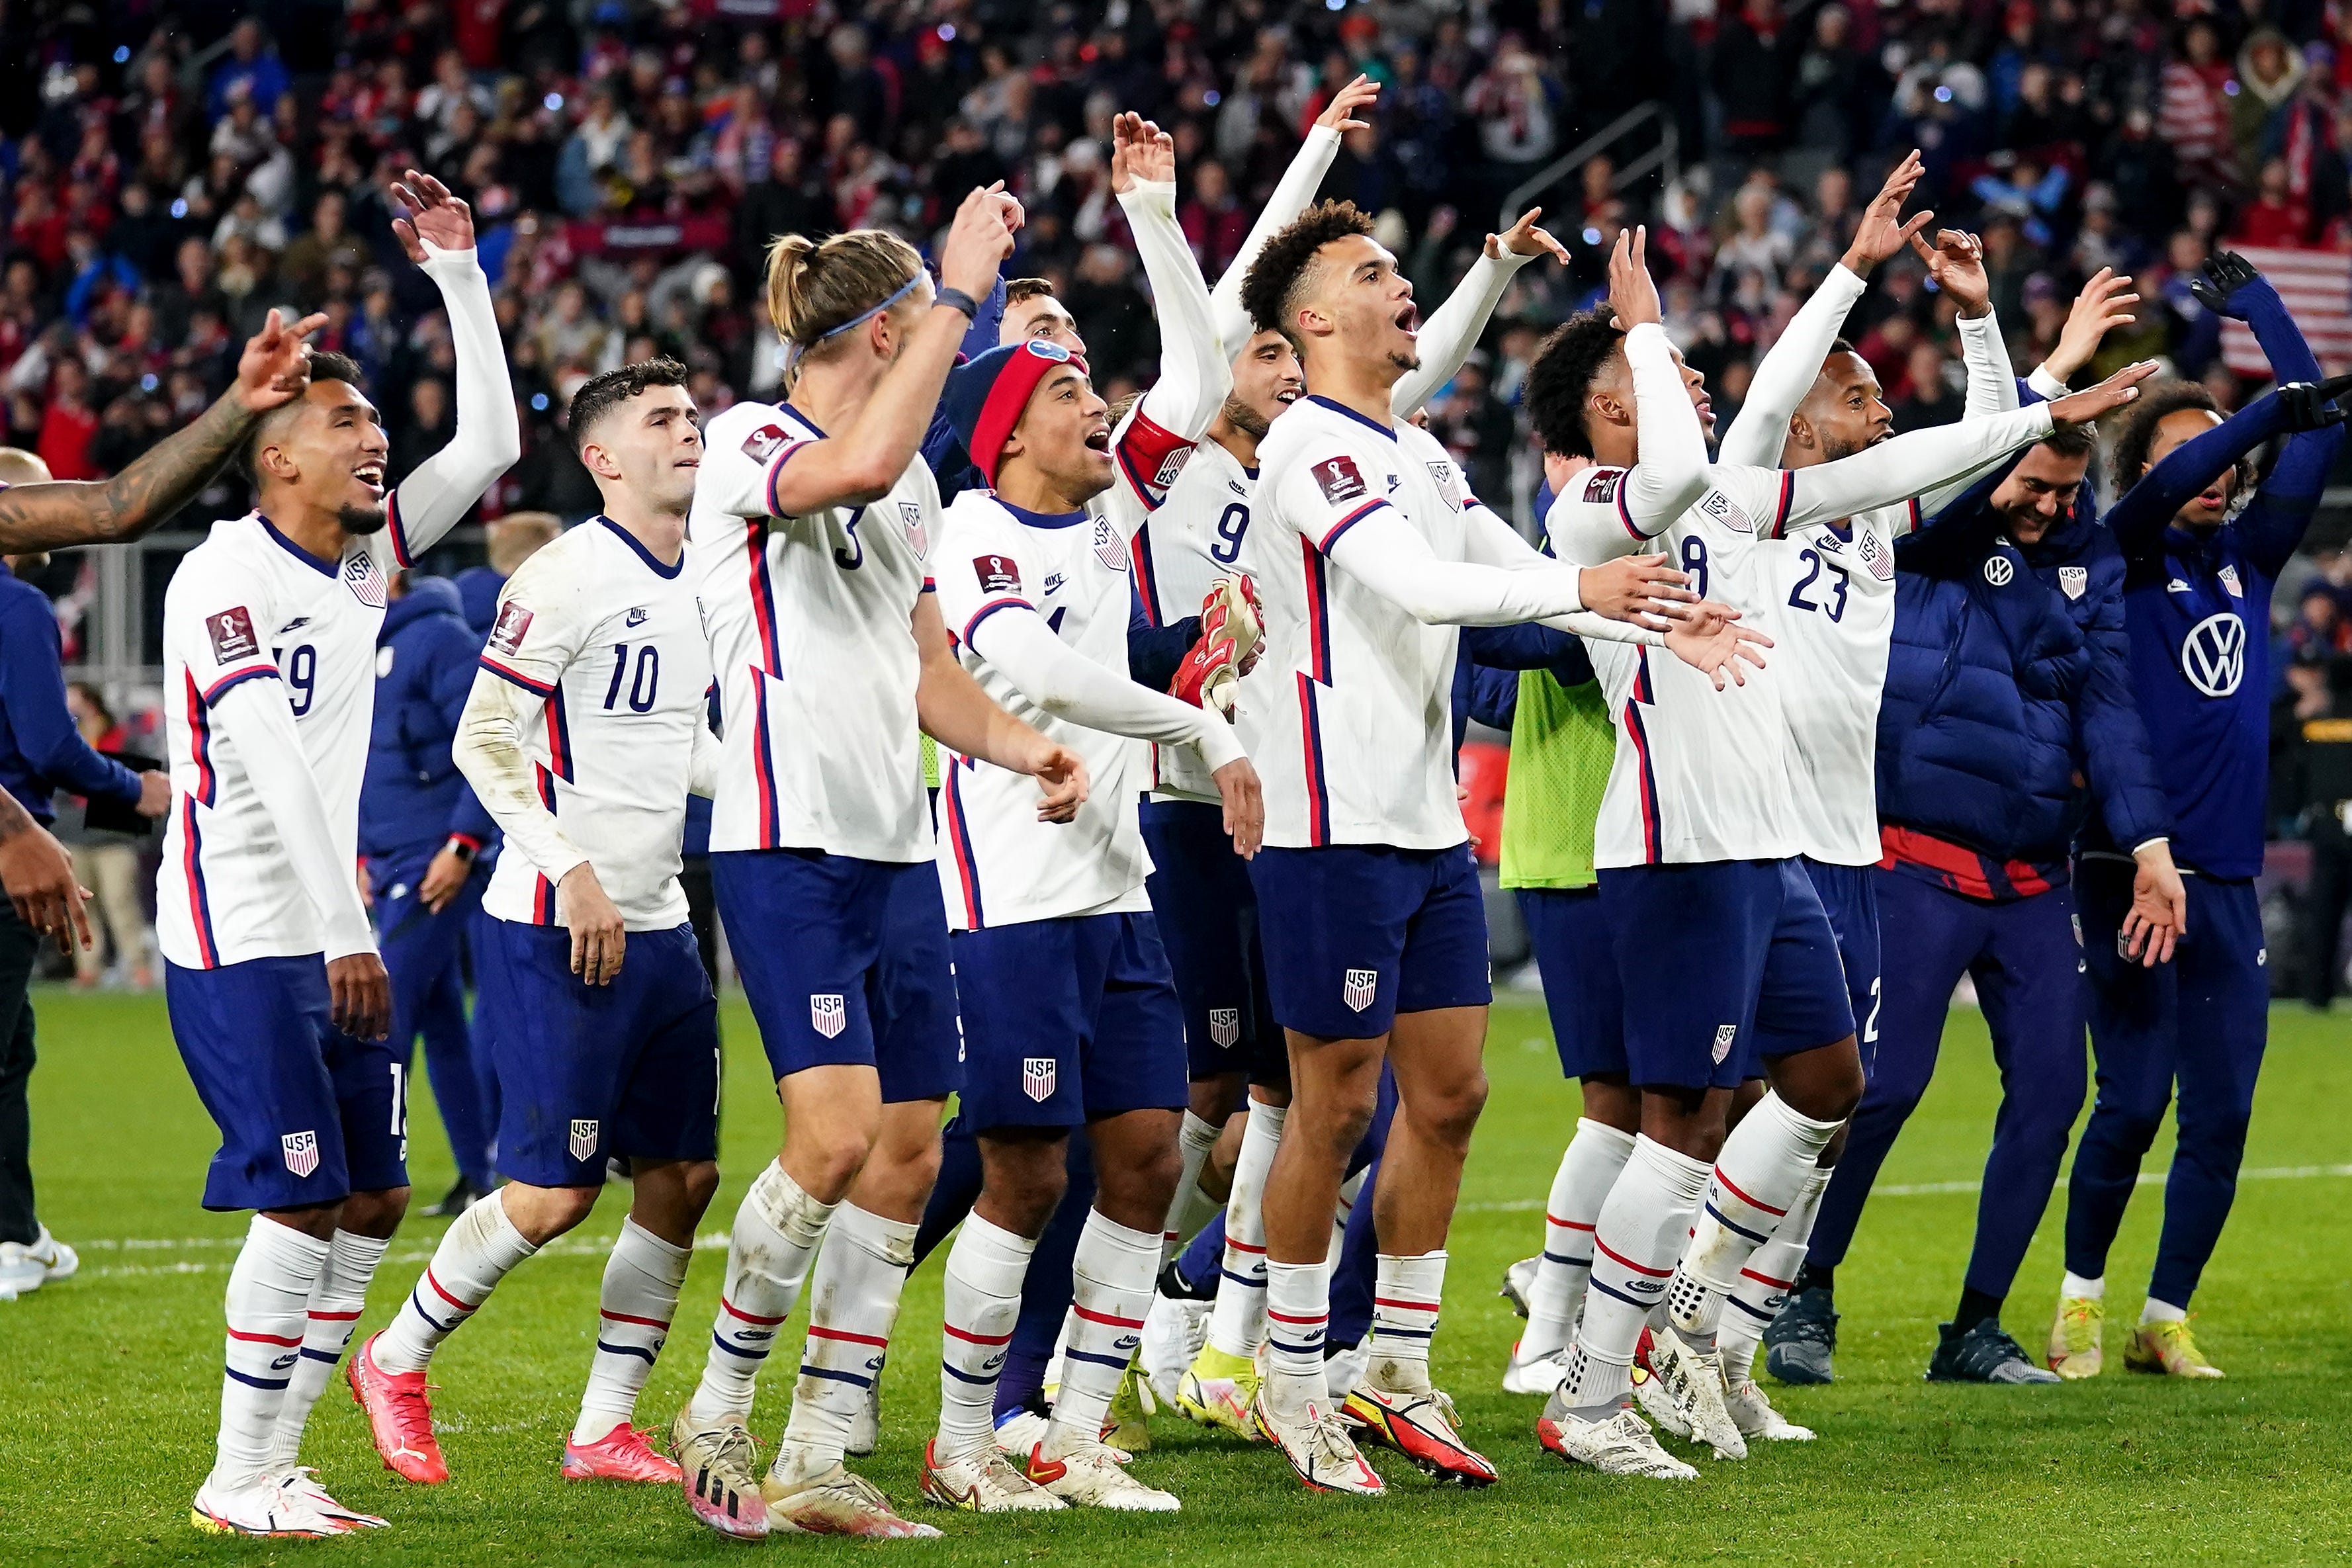 The U.S. men's soccer team waves their arms and cheers toward the crowd, on the pitch together after beating Mexico.